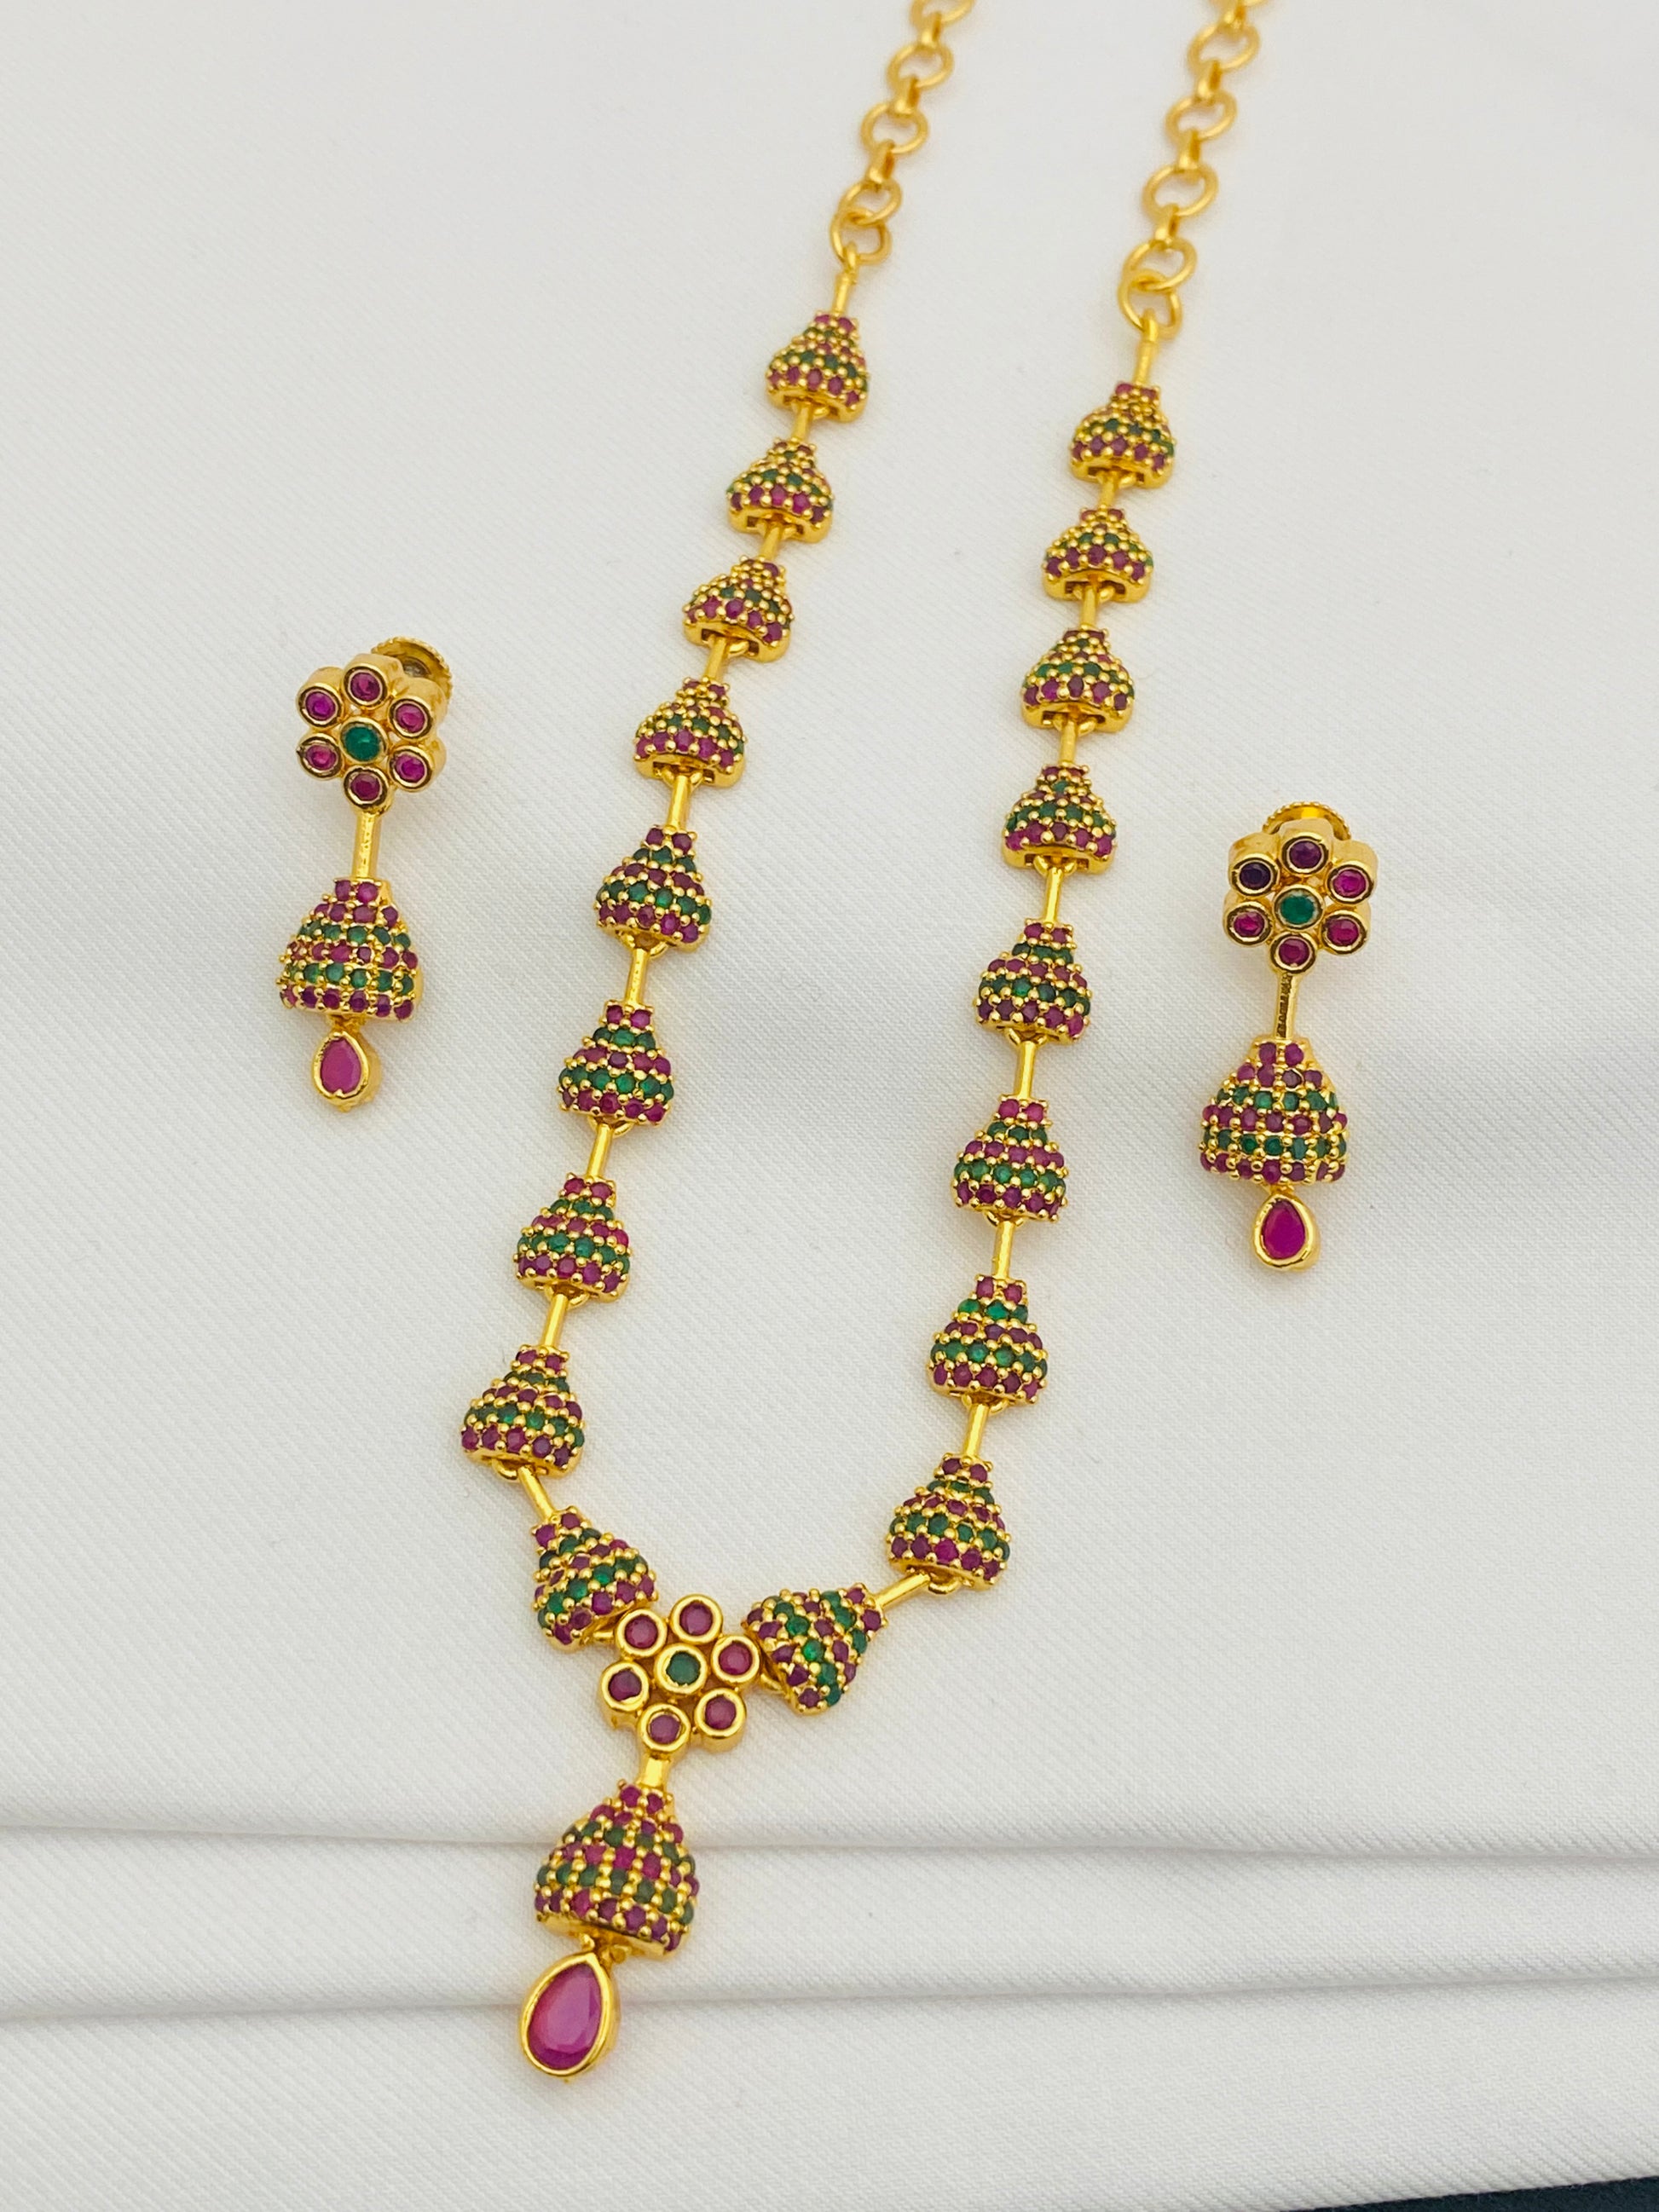 Beautiful Gold Plated Juhmka Designed Necklace And Earrings With Ruby And Emerald Stones